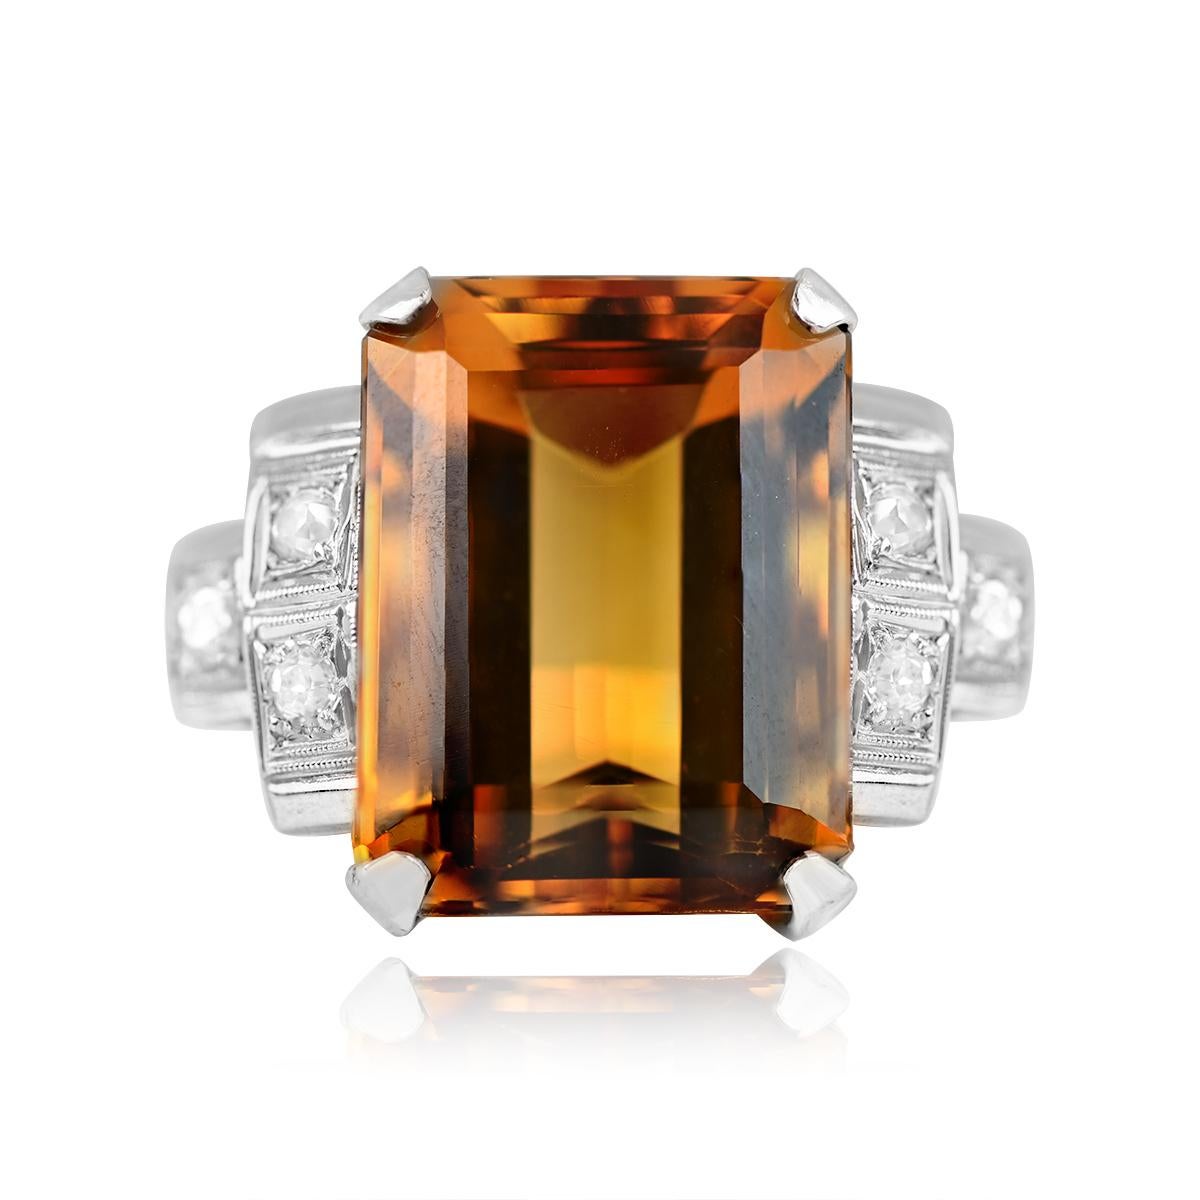 A Retro-style ring showcasing a vintage 12.40-carat prong-set emerald-cut natural citrine, exuding warmth and charm. The center stone is flanked by three old mine-cut diamonds set geometrically on the shoulders, complemented by fine milgrain